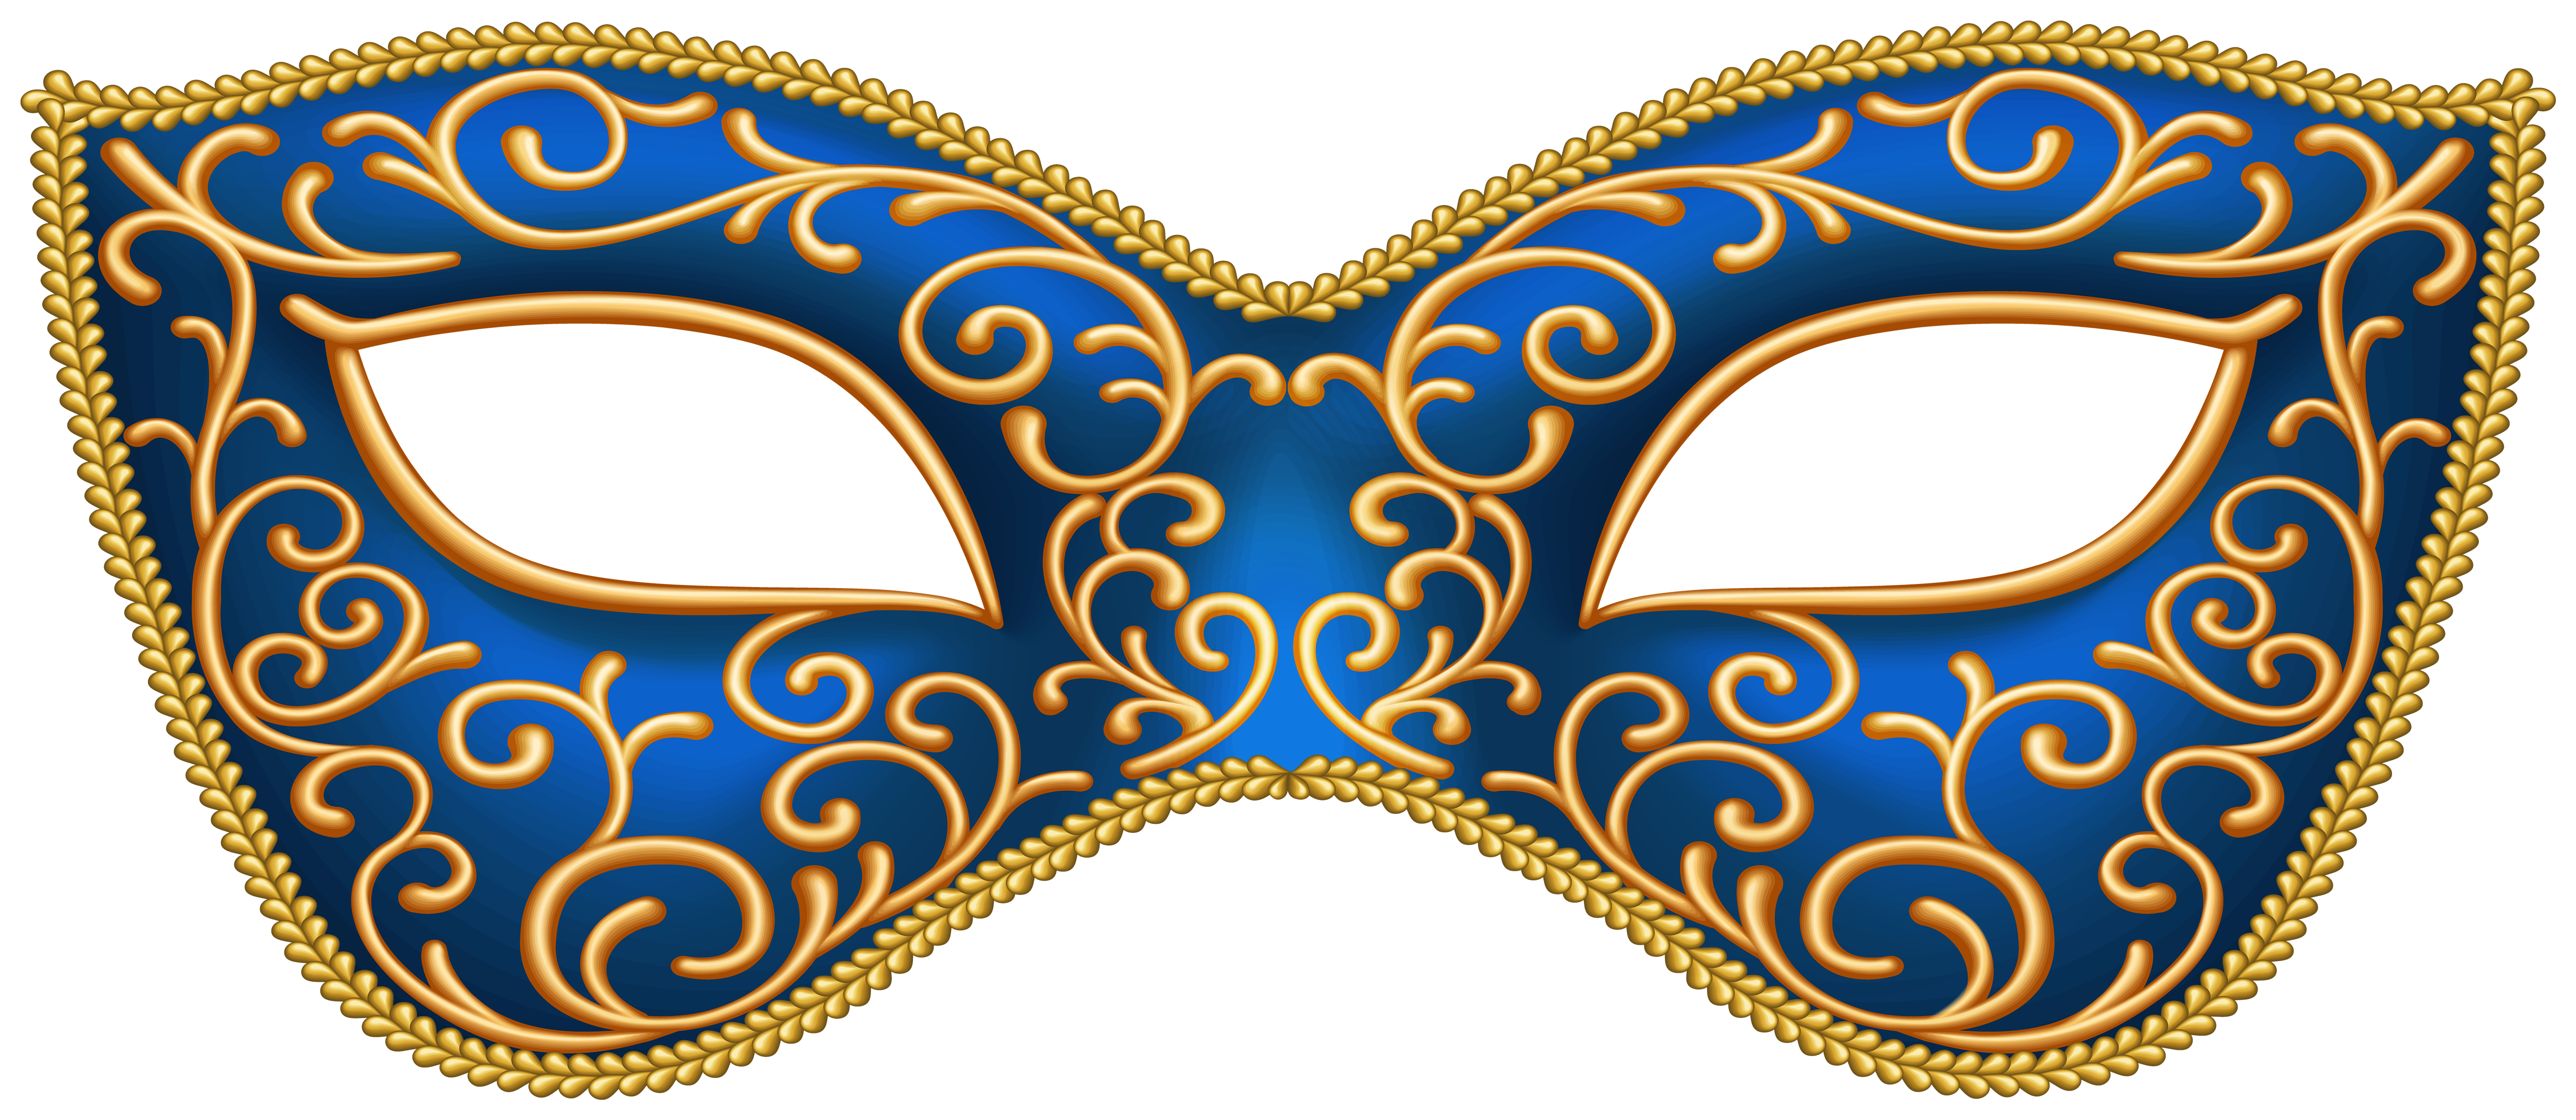 Blue Carnival Mask Transparent Image​ Gallery Yopriceville - High-Quality Free Images and Clipart